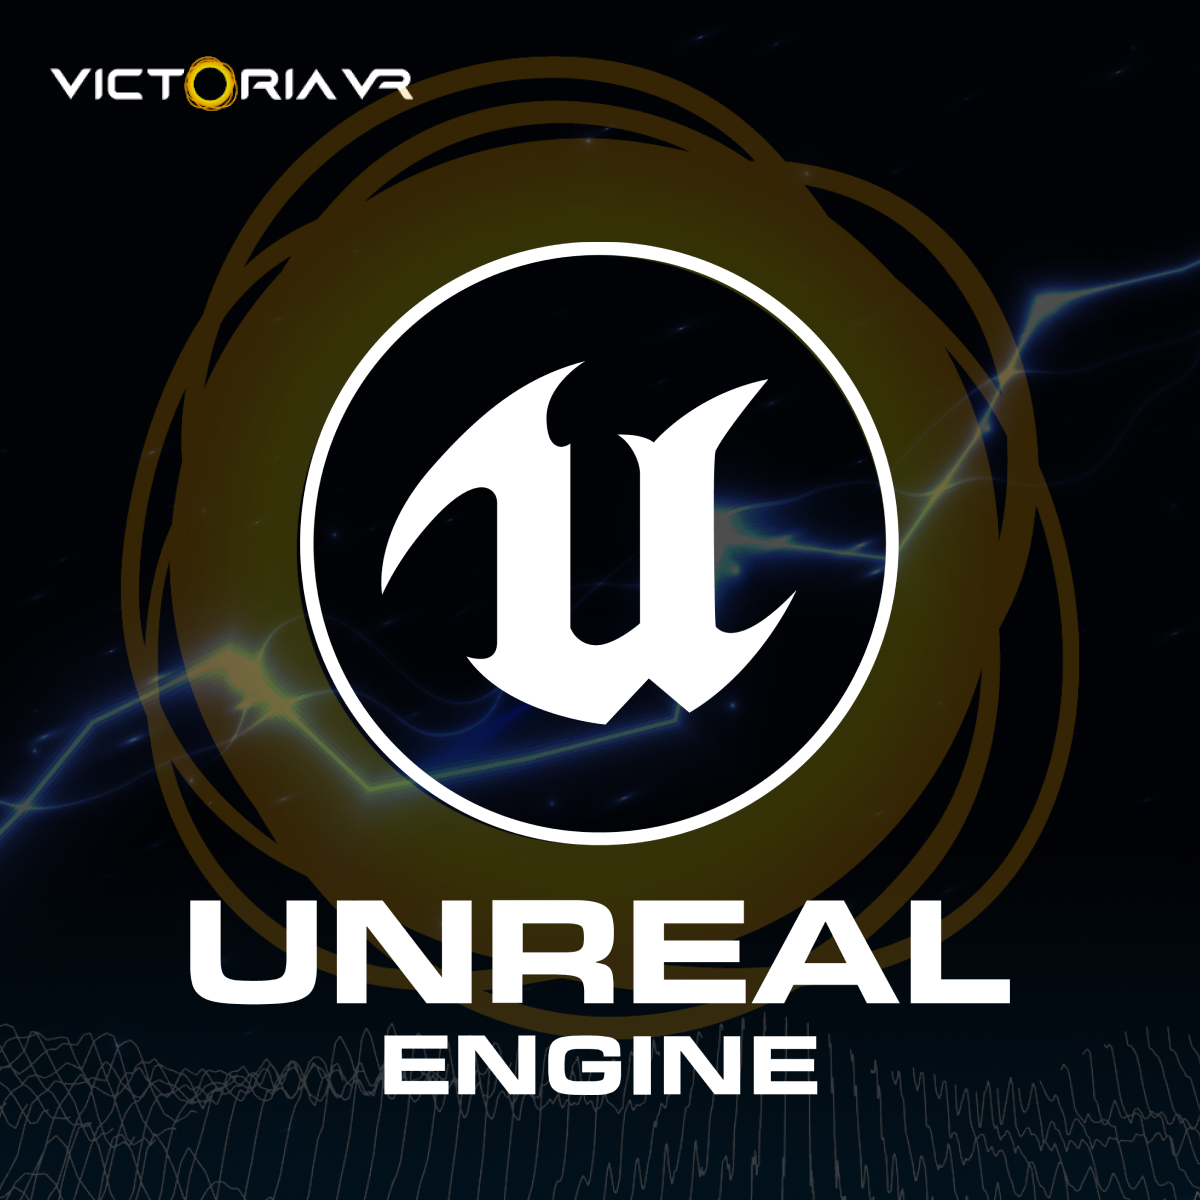 Why we chose Unreal Engine to create the Victoria VR metaverse | by  Victoria VR | Medium